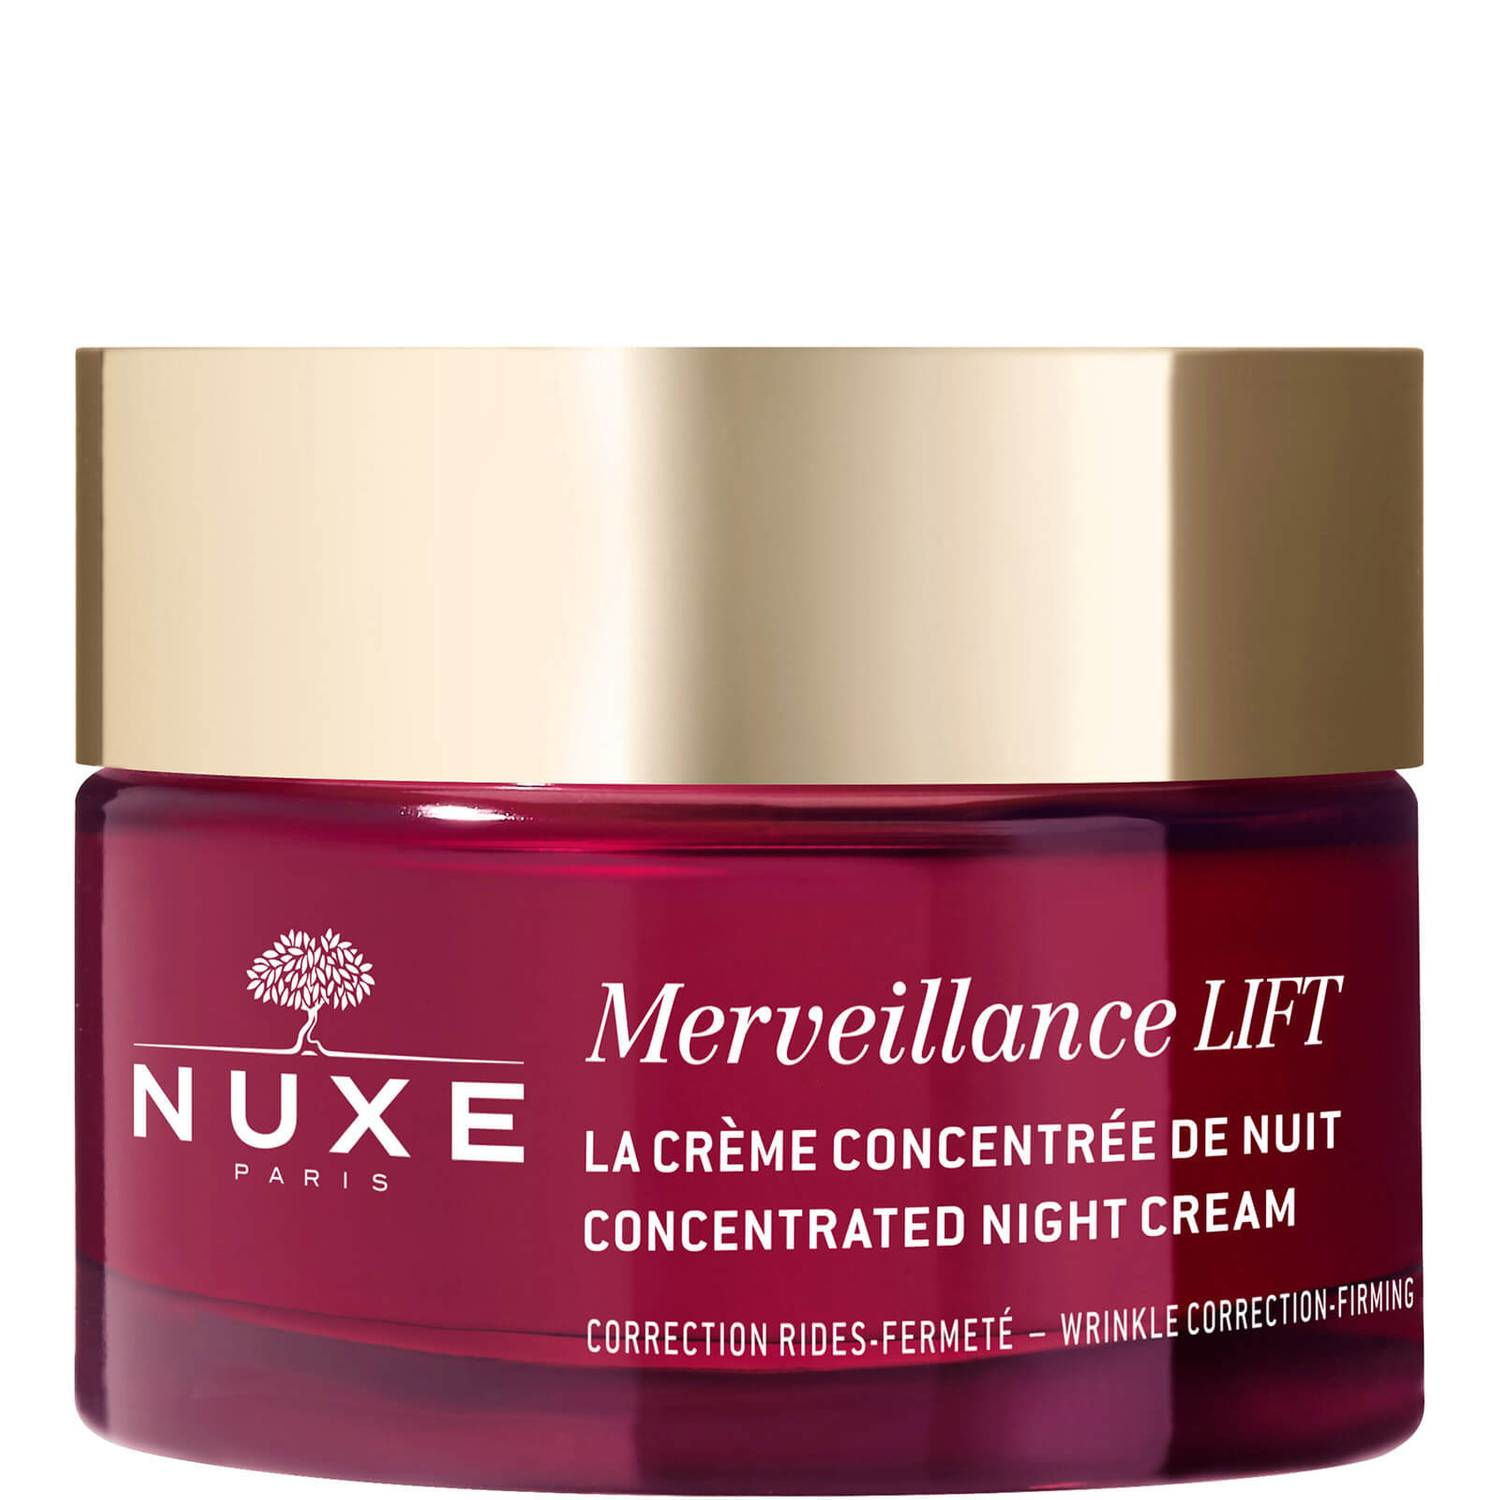 NUXE Merveillance Lift Concentrated